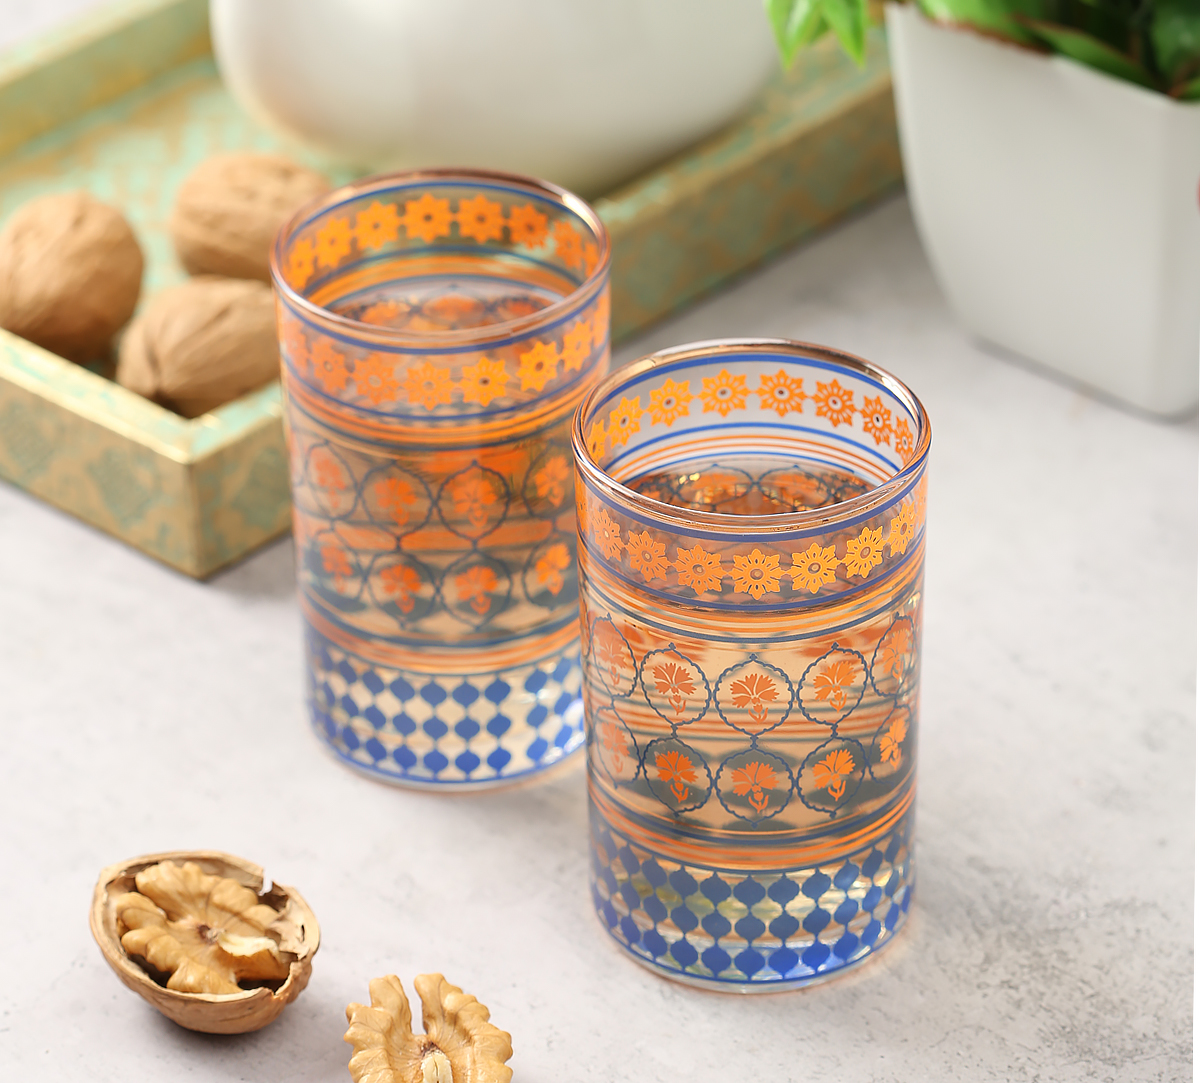 Floral Hypnosis Small Glass Tumbler (Set of 2)